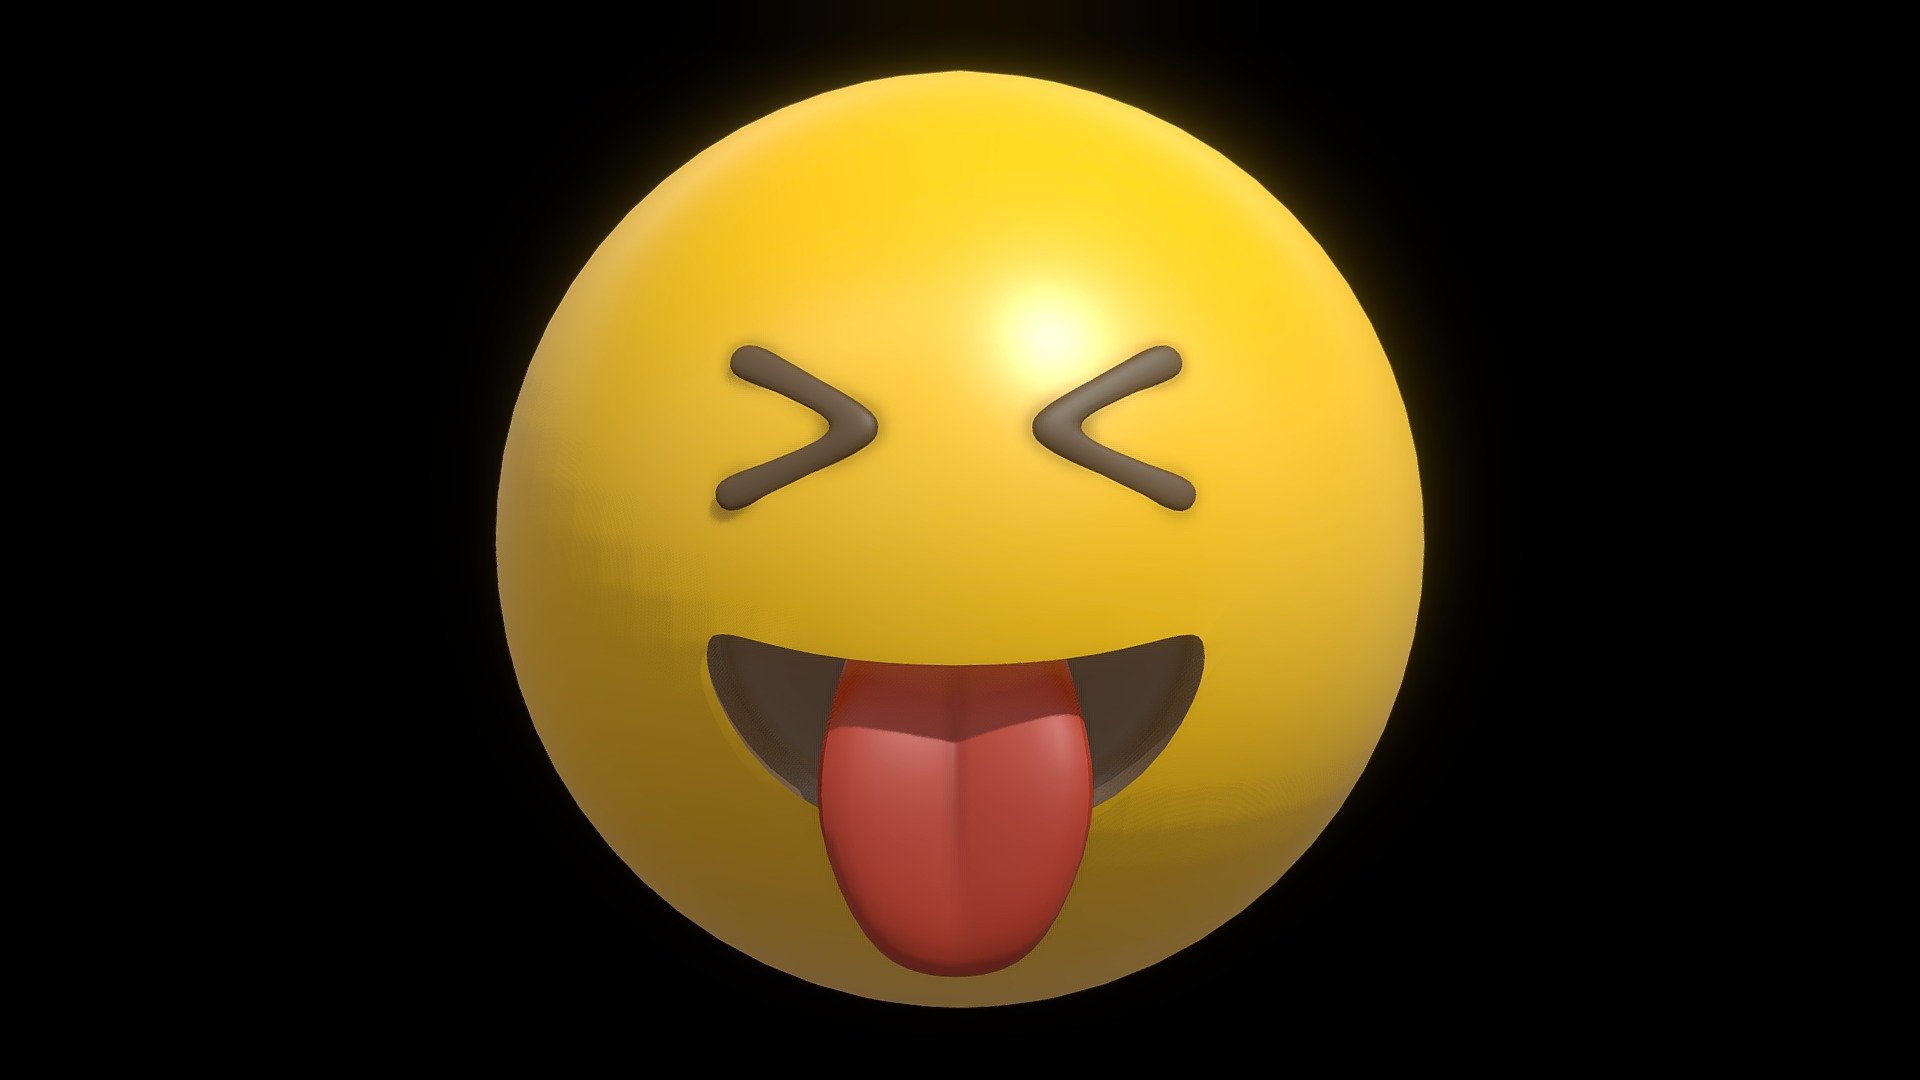 Tongue out yellow ball Emoticon Emoji or Smiley 3D Model Made in Blender 3.3.1

This model does include a TEXTURE, DIFFUSE and ROUGHNESS MAP, but if you want to change the color you can change it in the blend file, just use the principled bsdf and play with the rough and base color parameter

in the blender file i just included the lighting setting for rendering just like the preview image - Tongue out yellow ball Emoji or Smiley - Buy Royalty Free 3D model by pakyucangkun 3d model